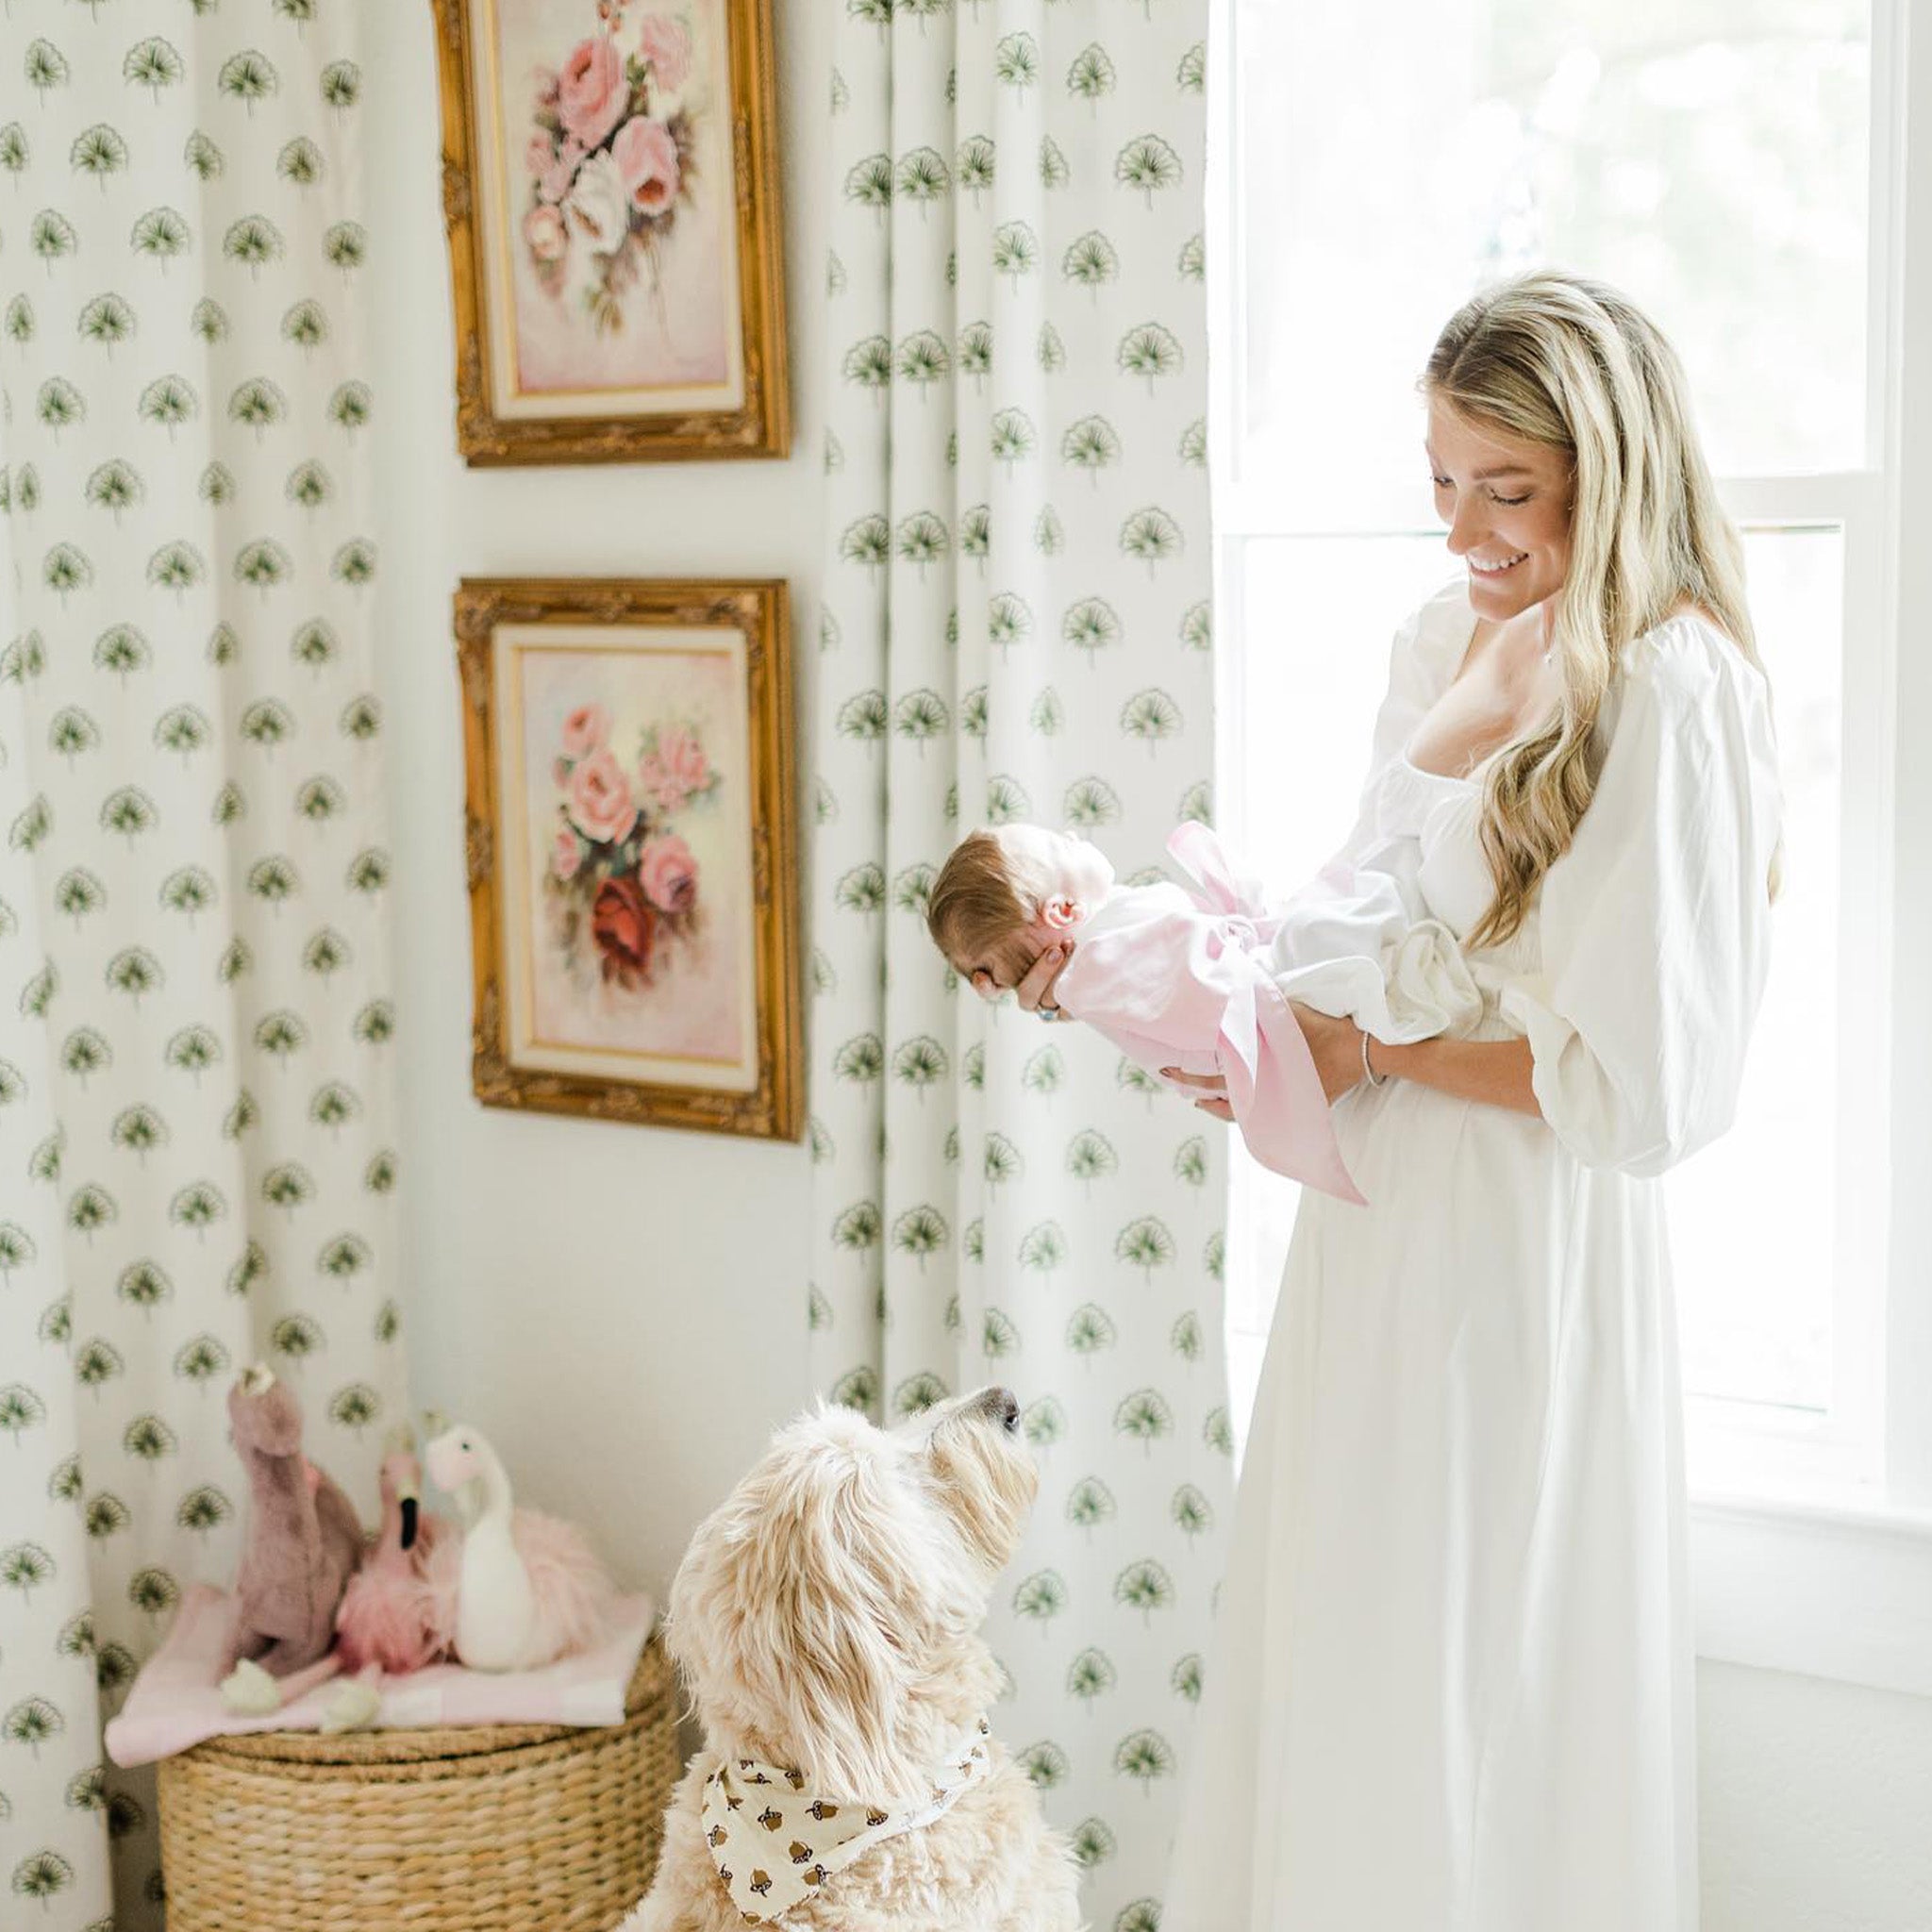 Corner Close-up styled with Green Floral Printed Curtains on illuminated window next to blonde mother wearing a white long dress holding newborn baby